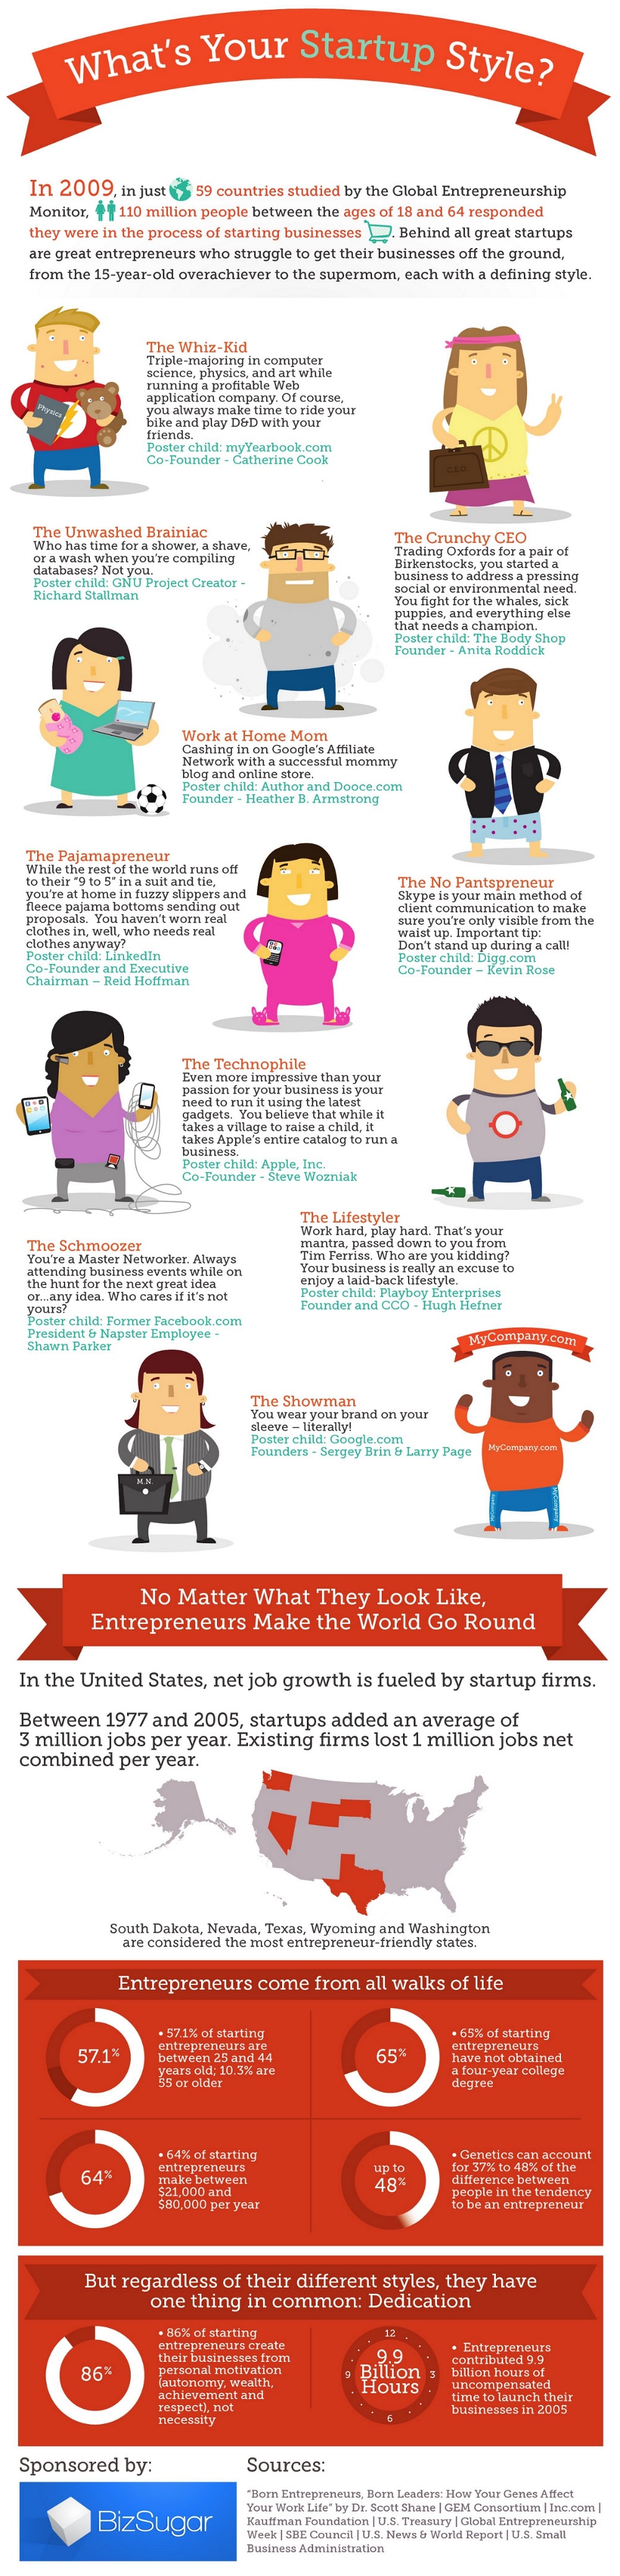 10 Entrepreneurial Styles: Which One Are You? [Infographic]